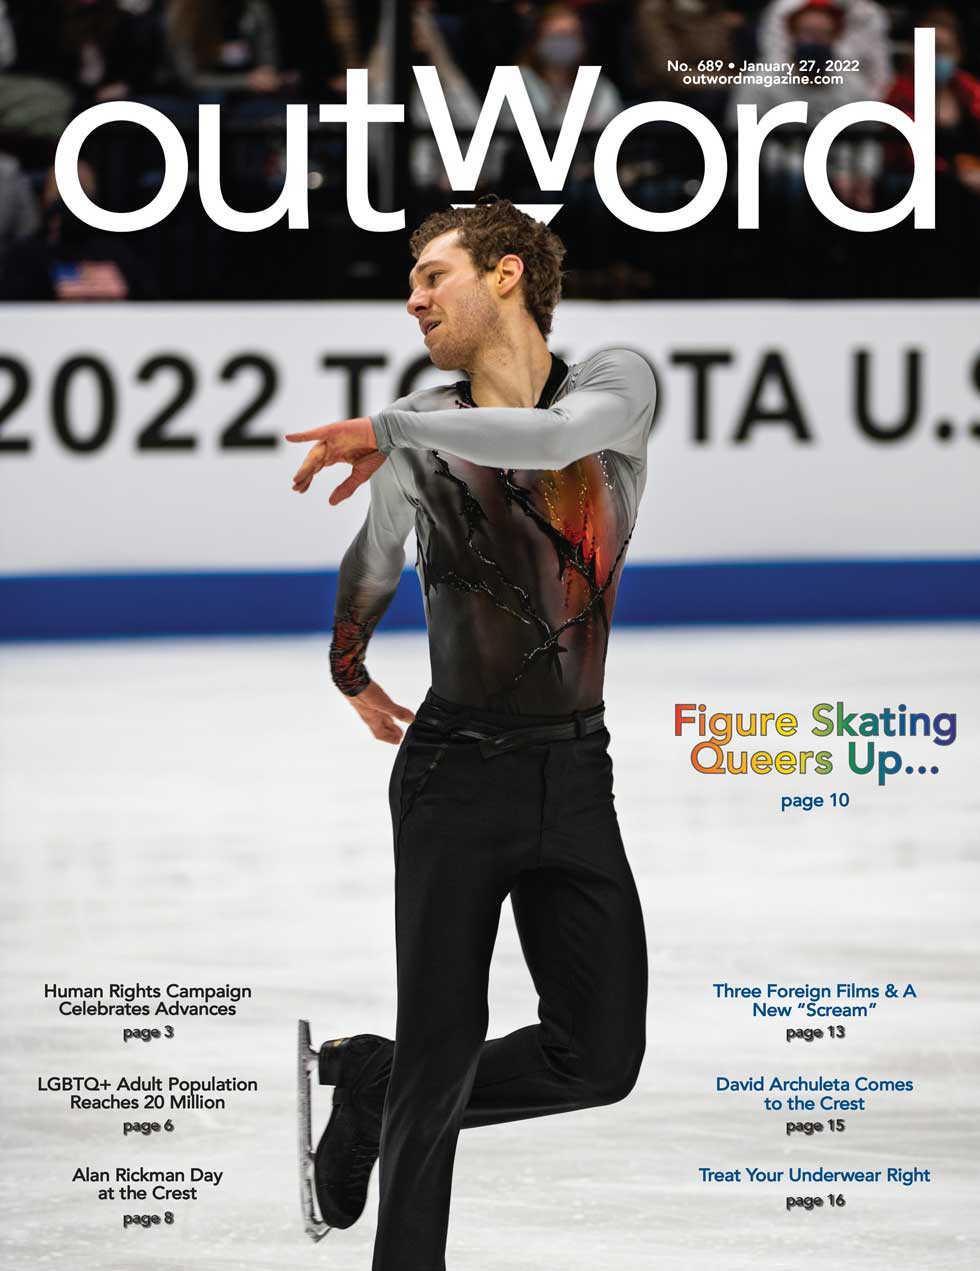 January 27, 2022 | The New Issue is OUT… On ICE!